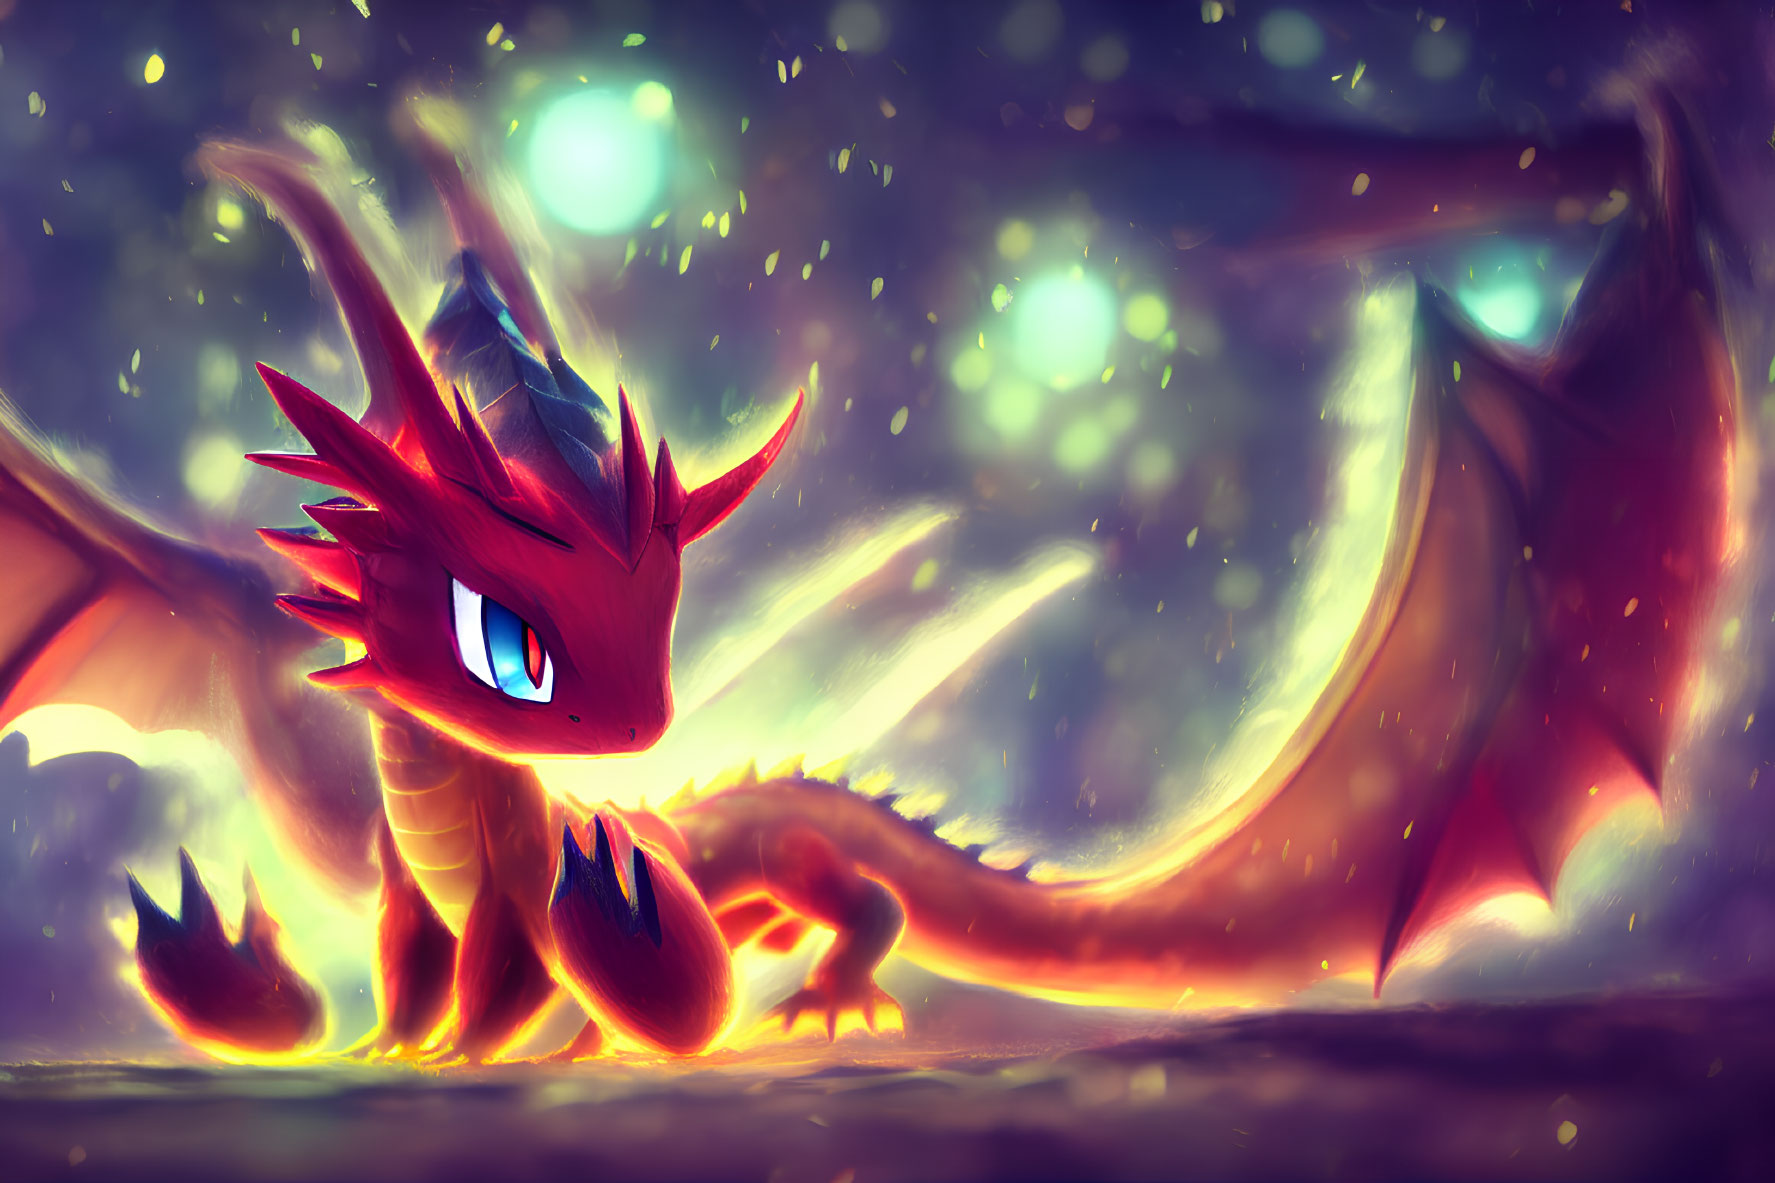 Red dragon with blue eyes in mystical nighttime scene